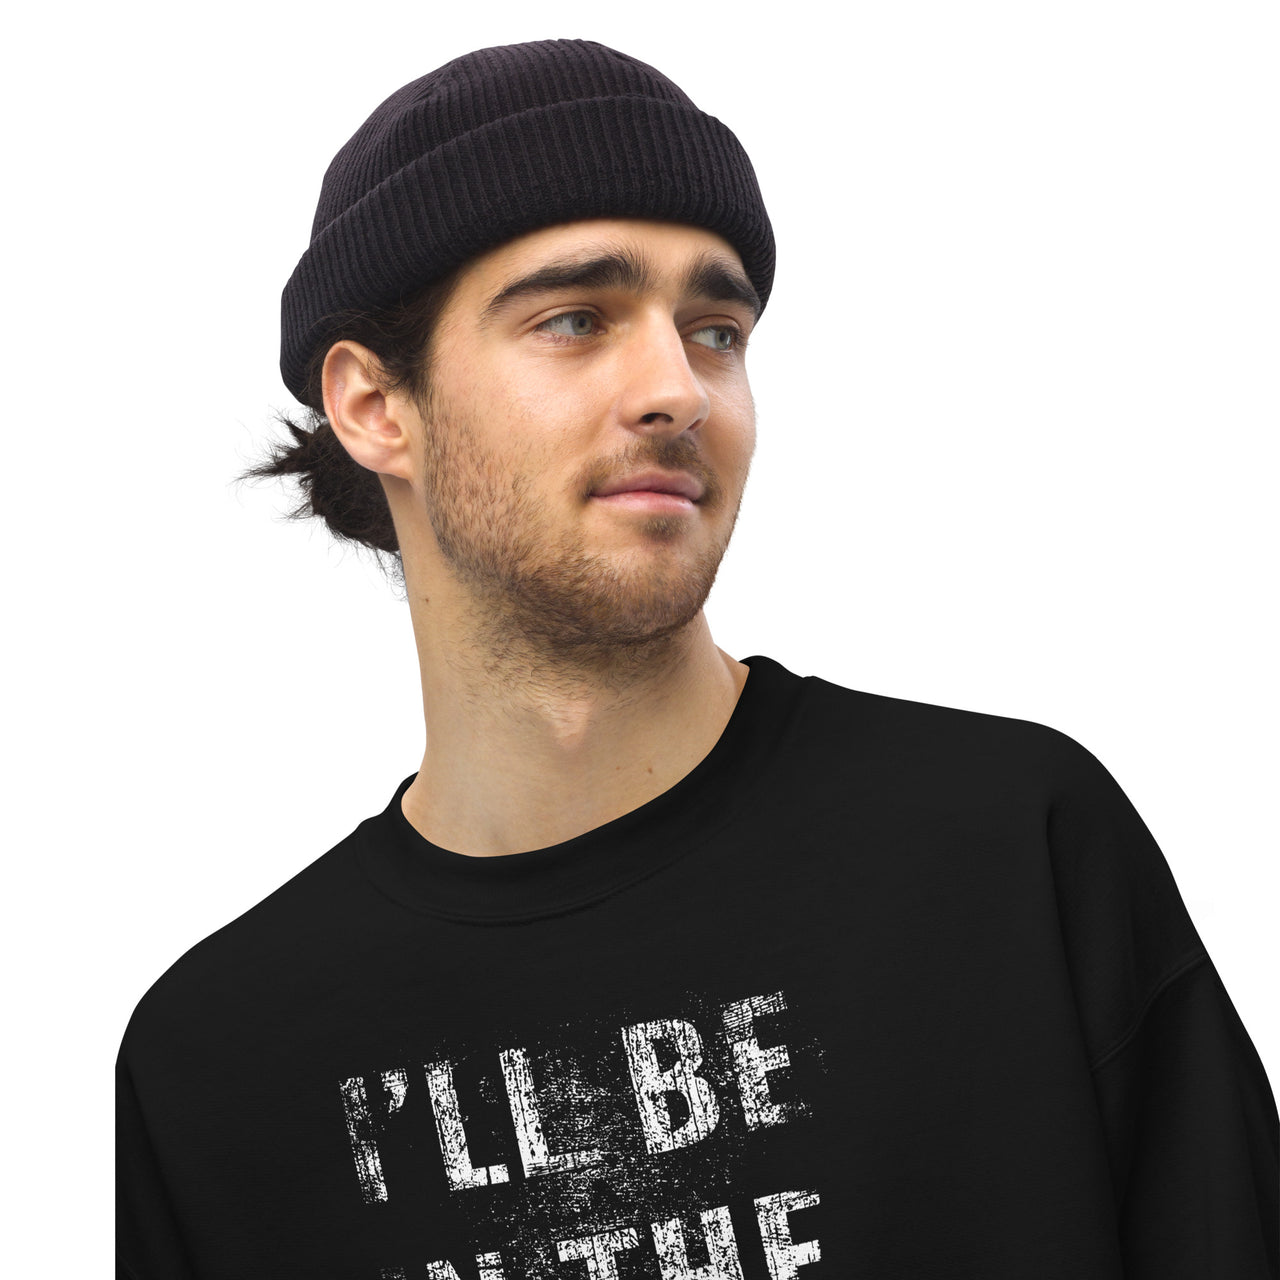 I'll Be In The Garage, Mechanic Sweatshirt , Car Enthusiast Crew Neck Pullover modeled in black